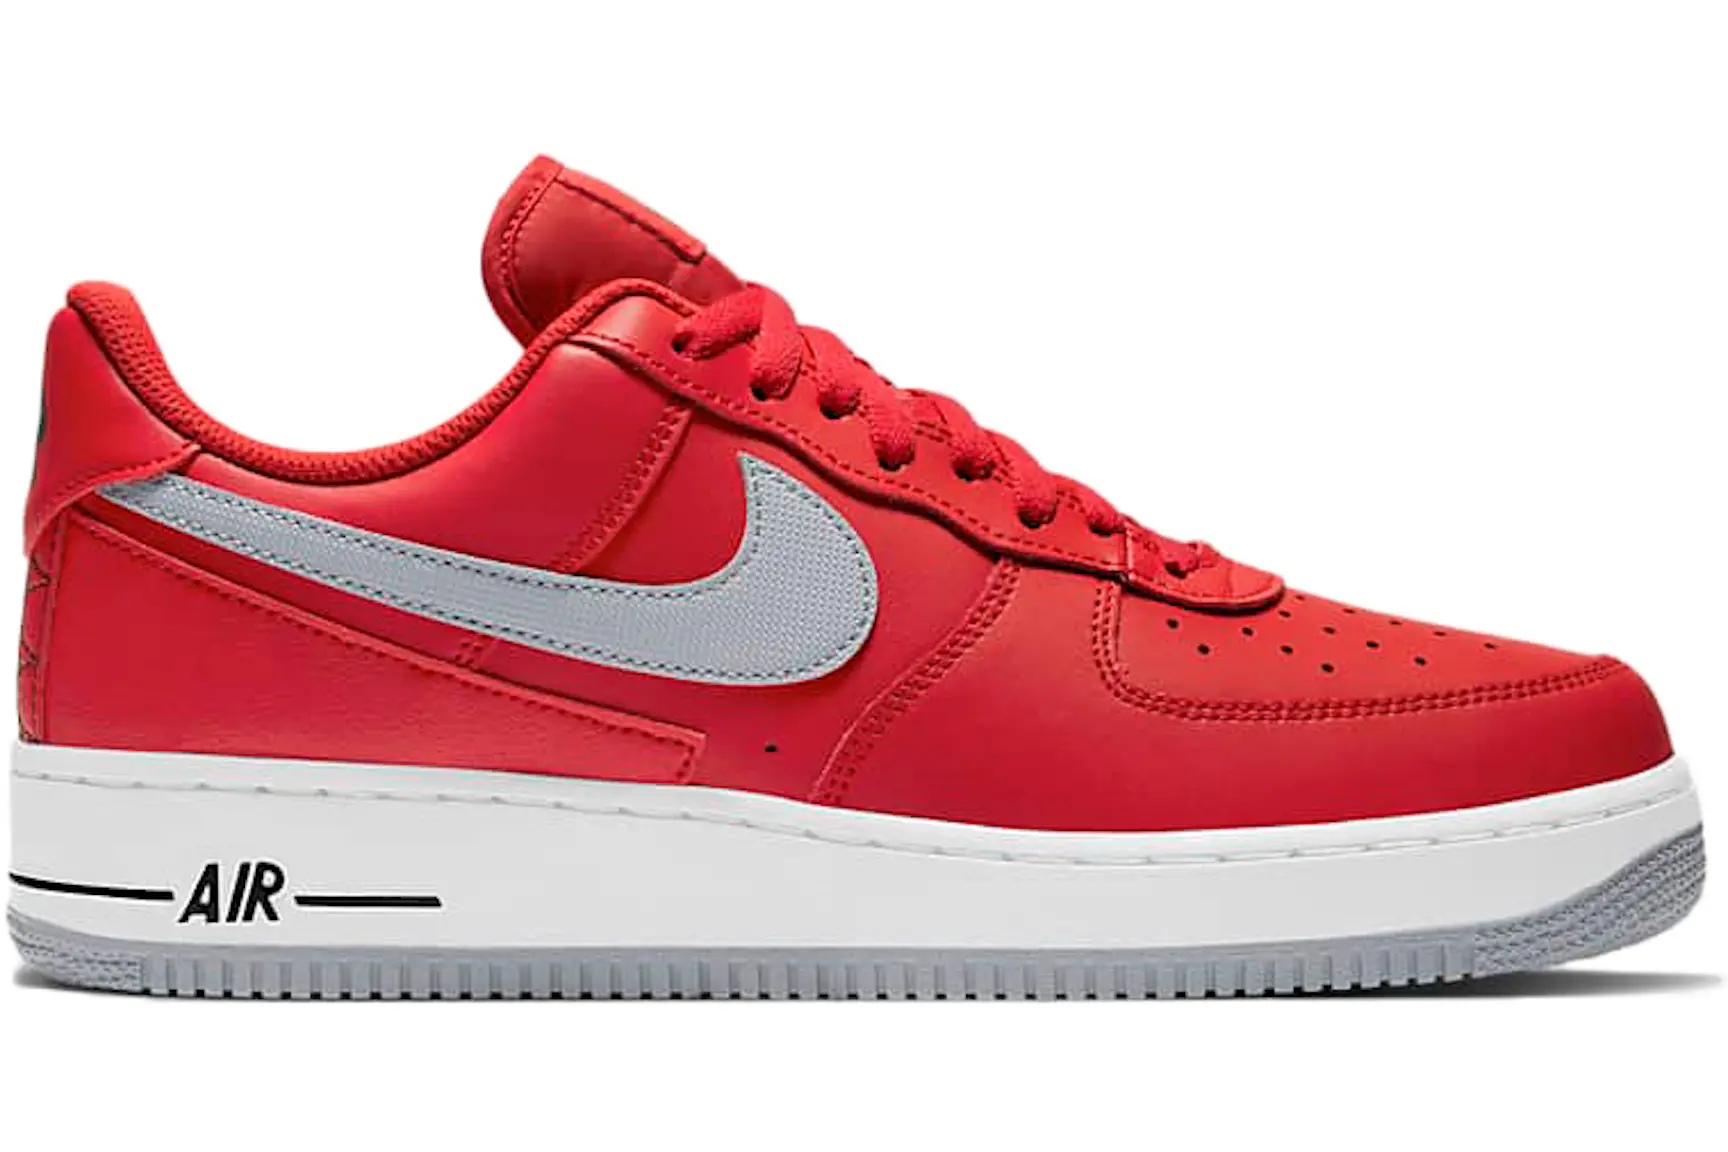 Nike Air Force 1 Low Technical Stitch University Red Men's - DD7113-600 ...